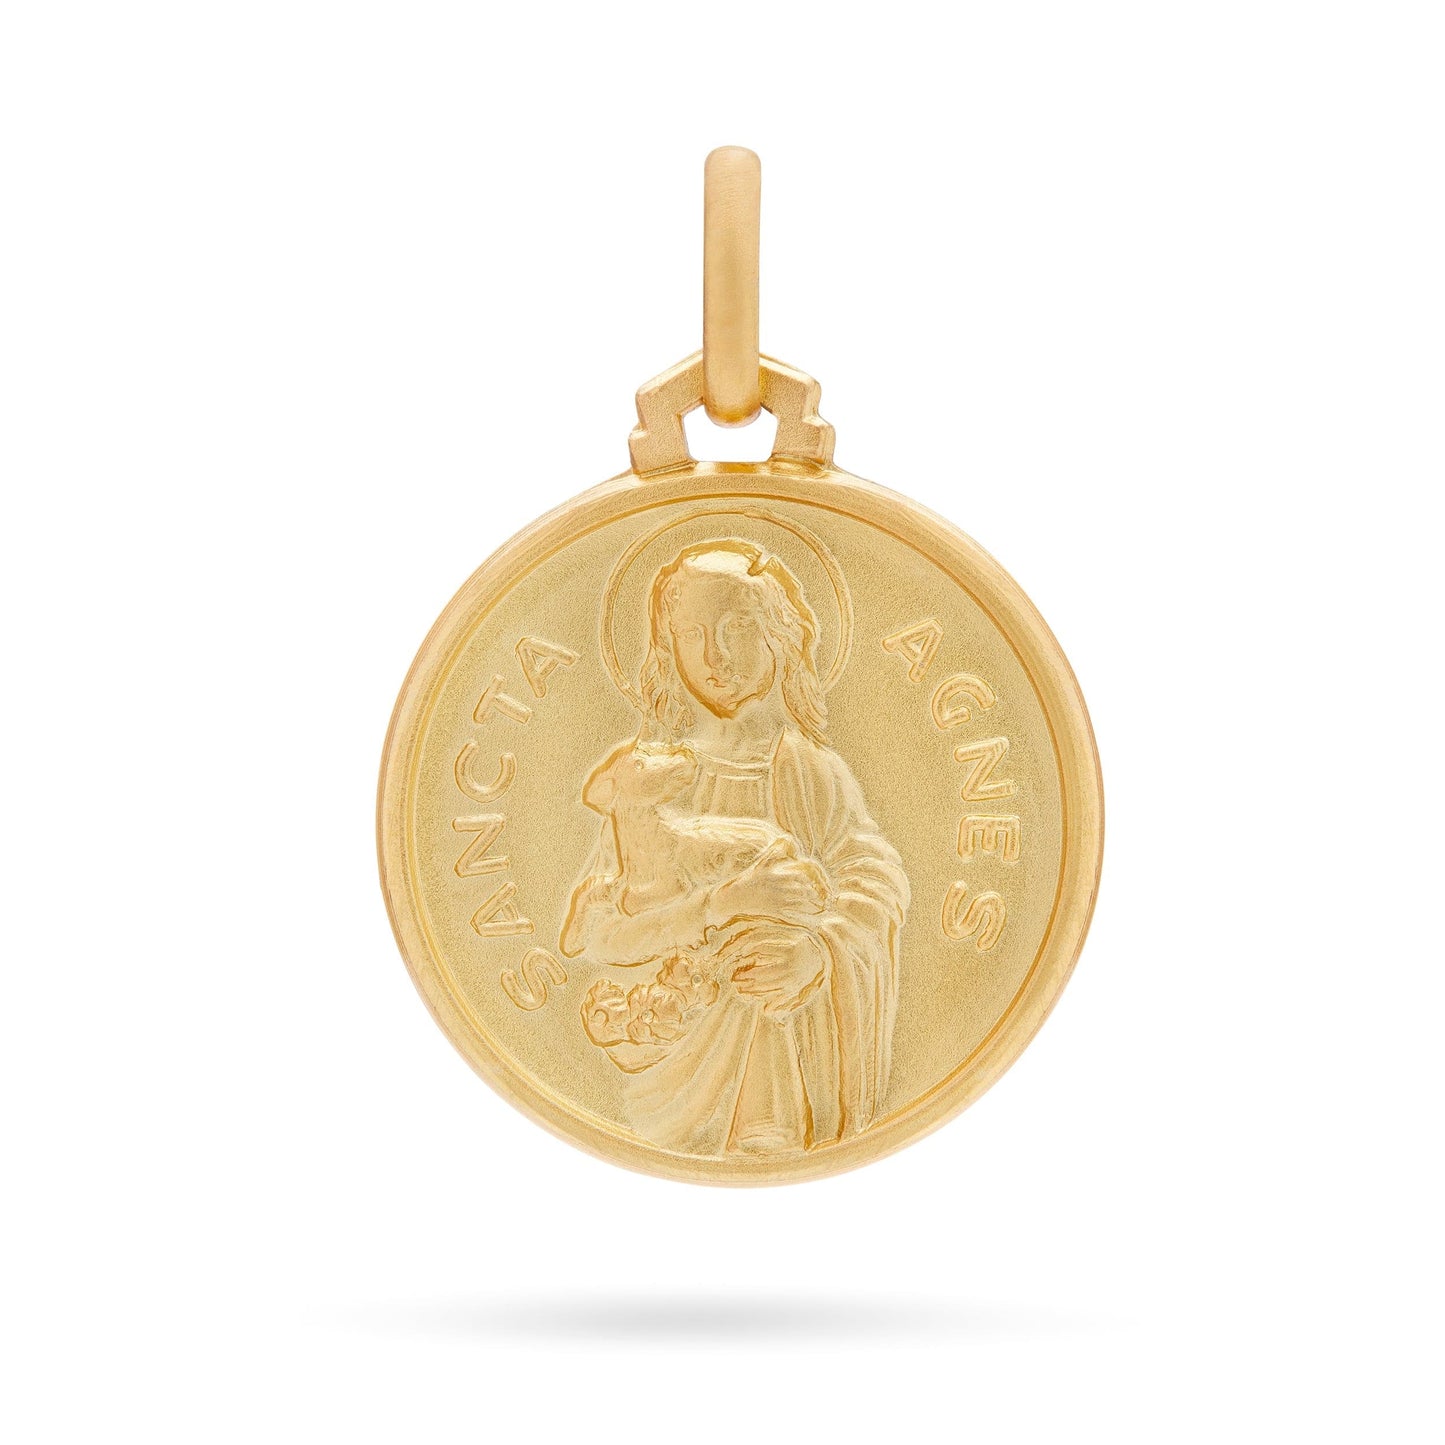 MONDO CATTOLICO Medal 18 mm (0.70 in) Gold medal of Saint Agnes of Rome